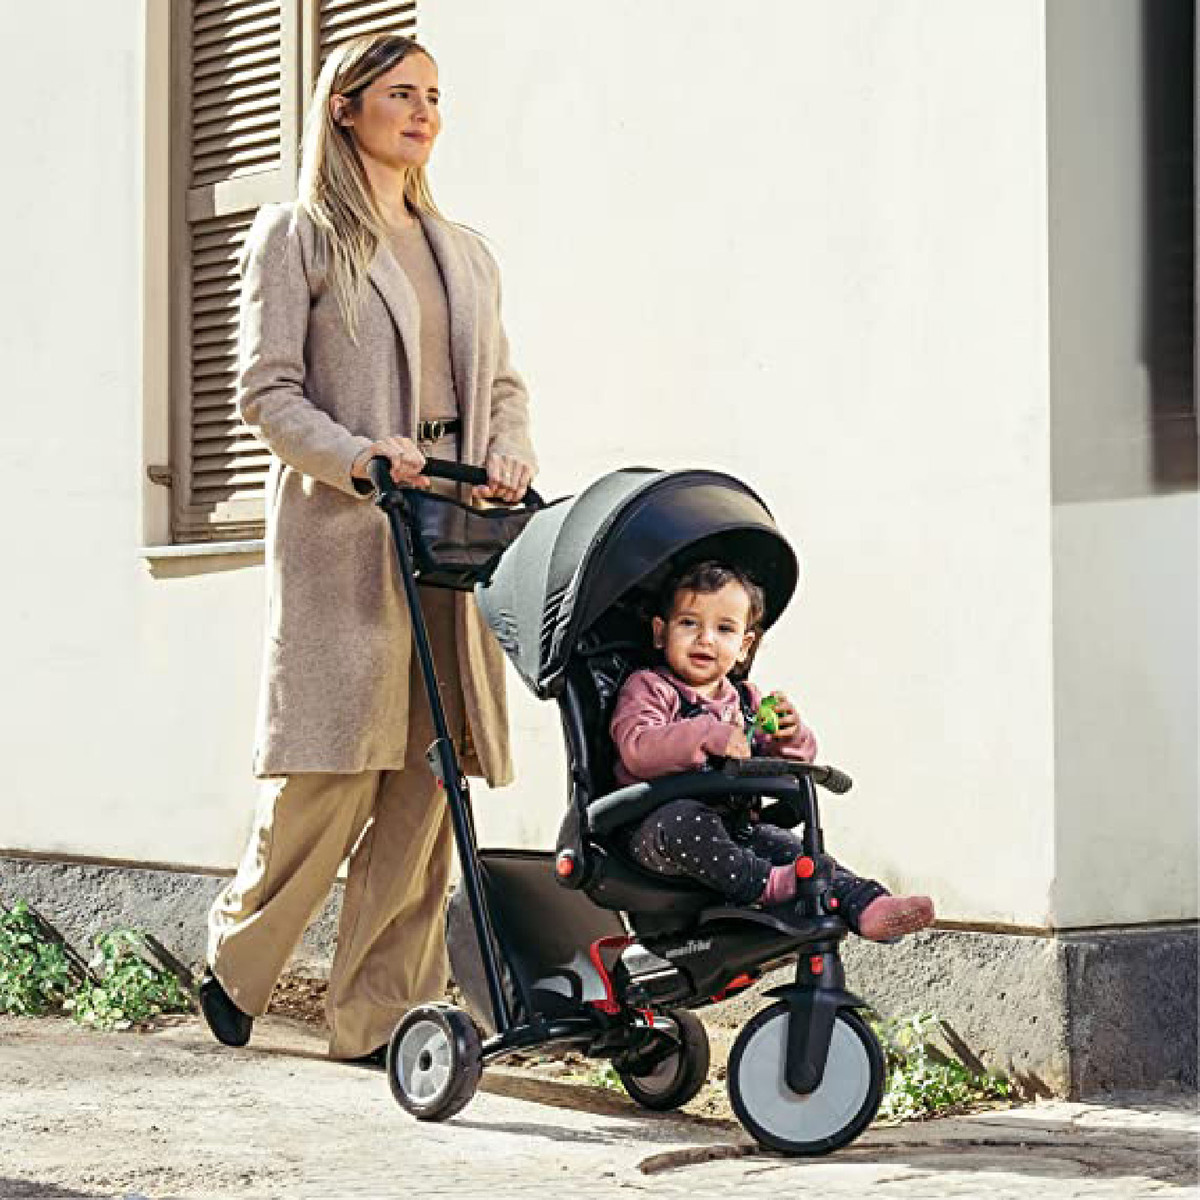 Smart Trike Fold Tricycle Stroller, For 6 months+ with 5 Point Harness, Black, 5501100